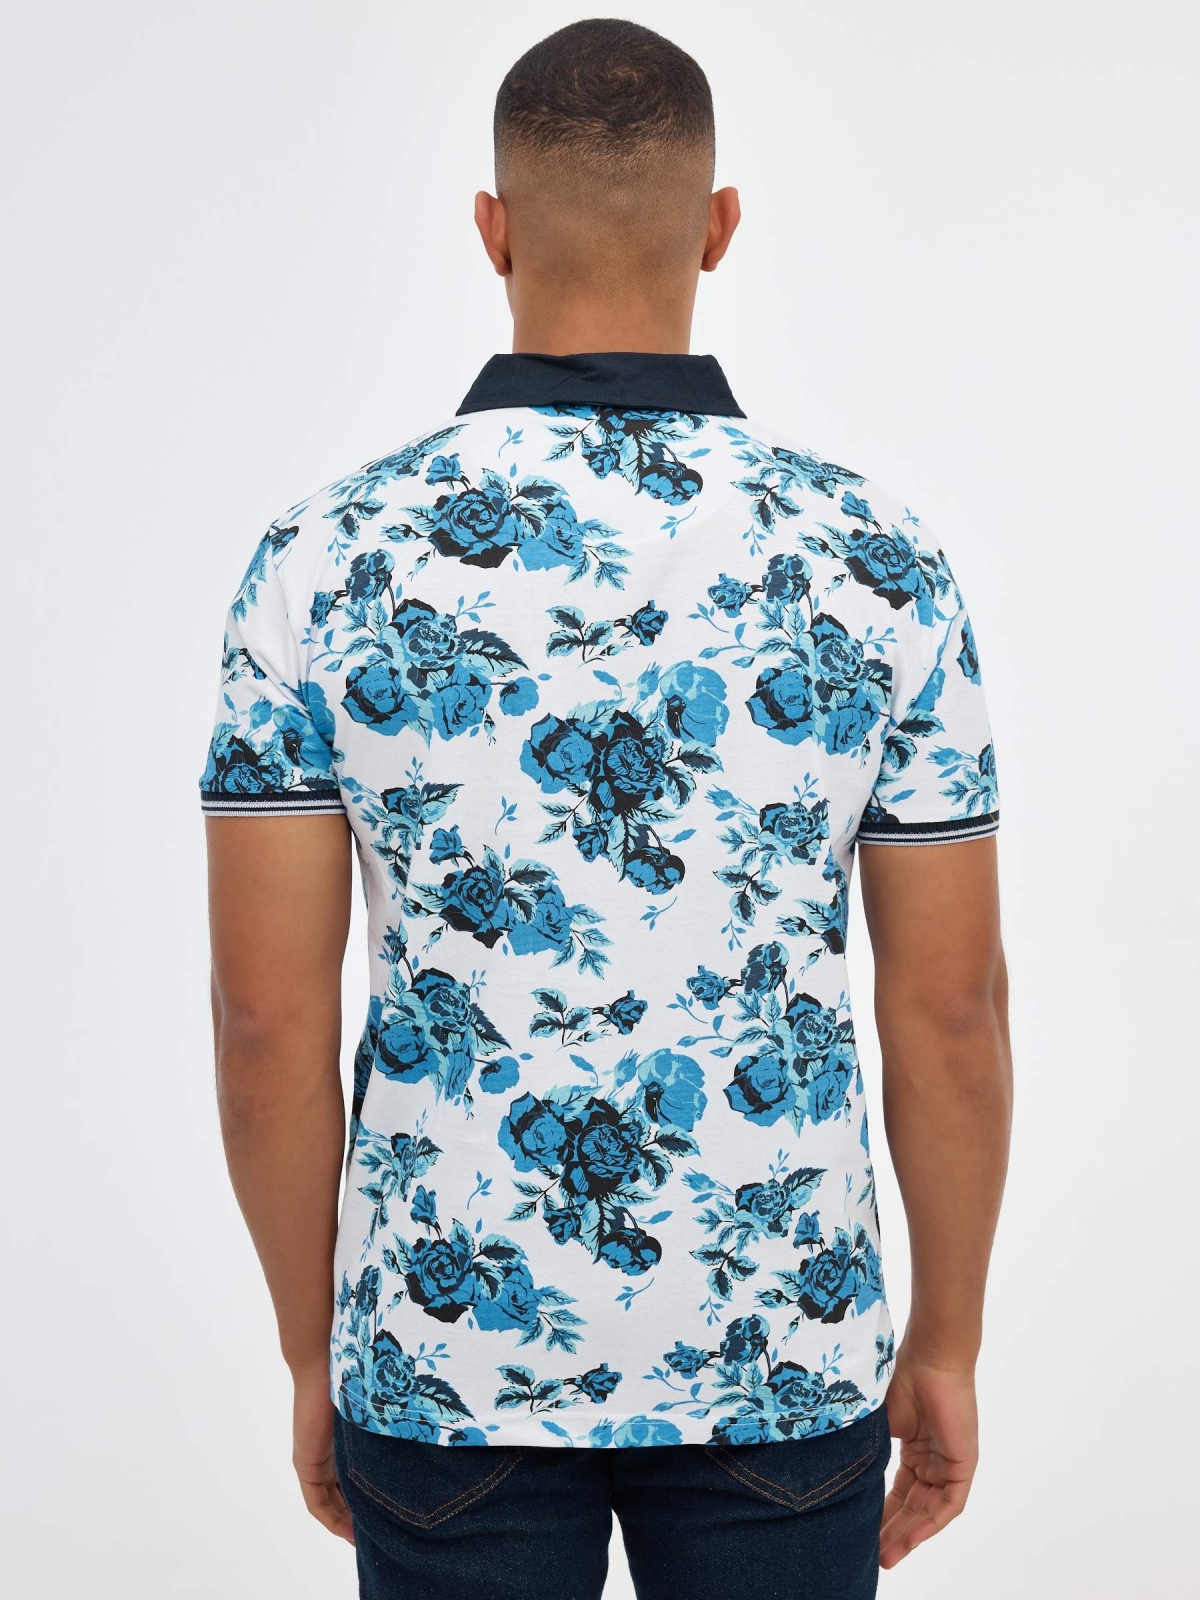 Blue rose print polo shirt white middle back view